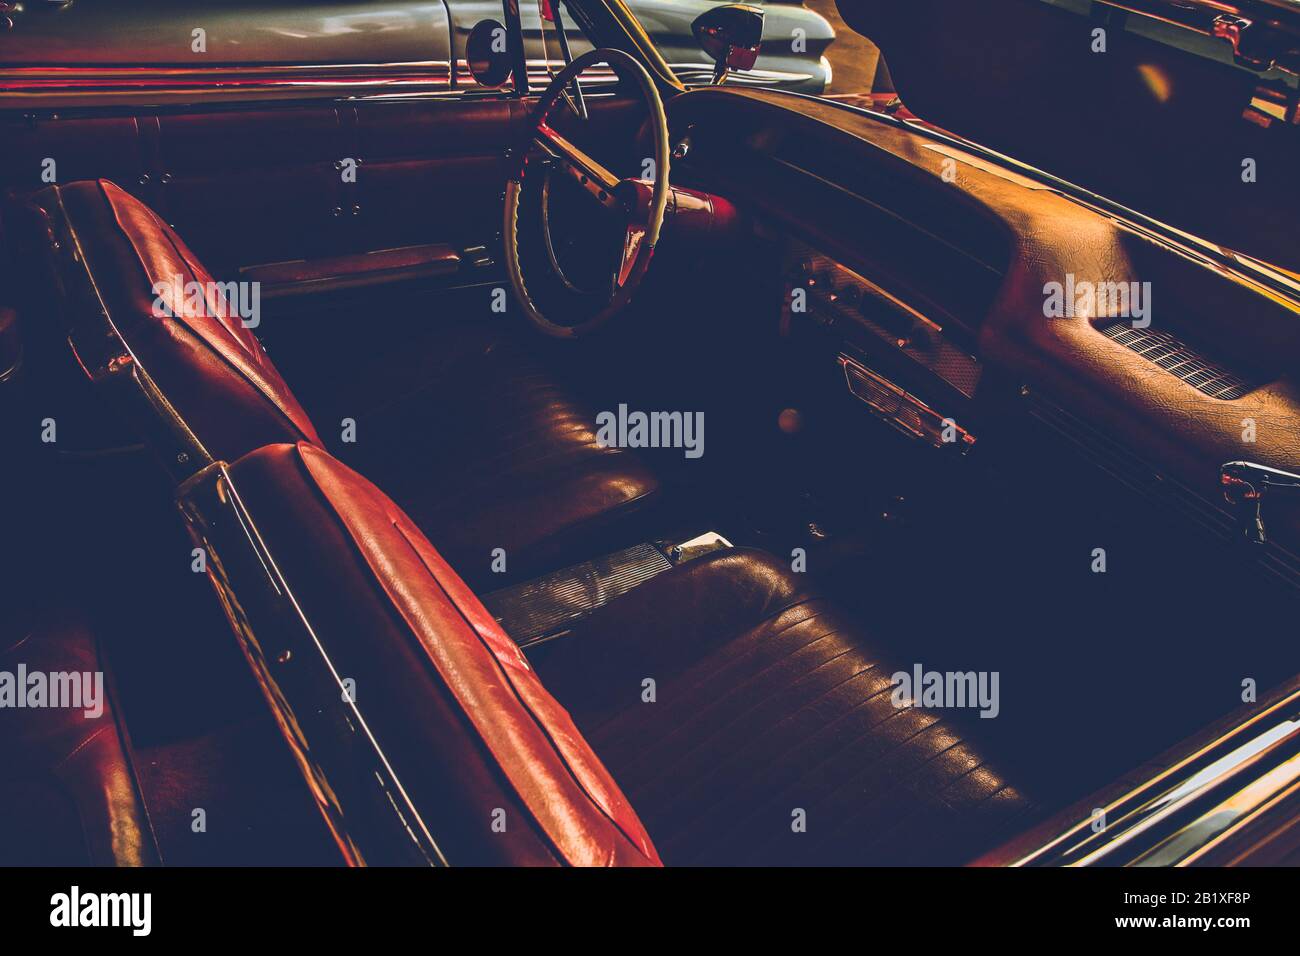 Vintage car interior to show a 1920's cinematic moody themed background Stock Photo